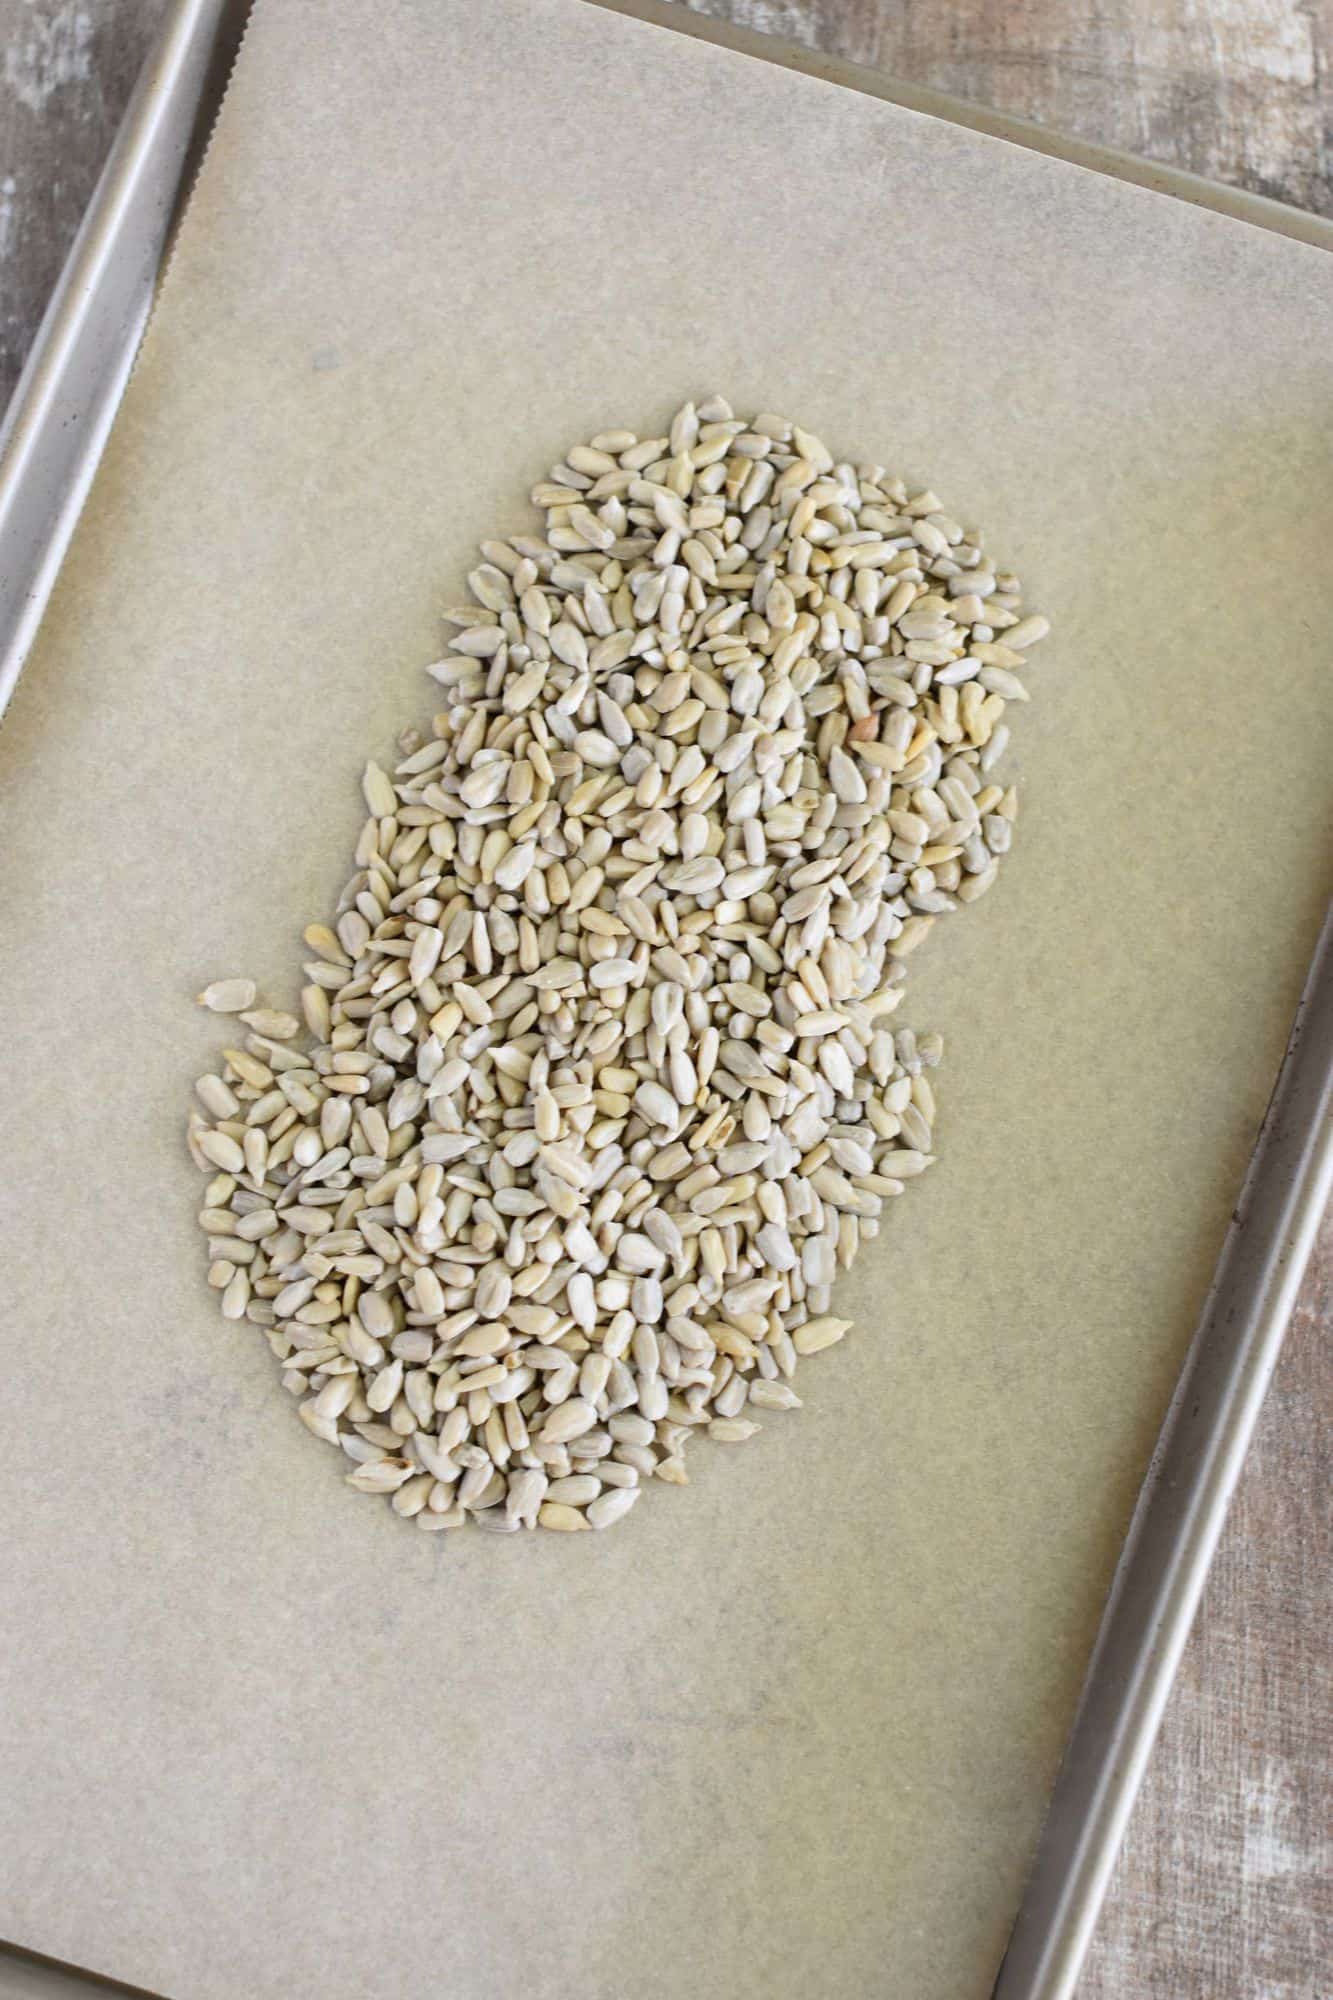 raw kernels in pile in middle of baking sheet